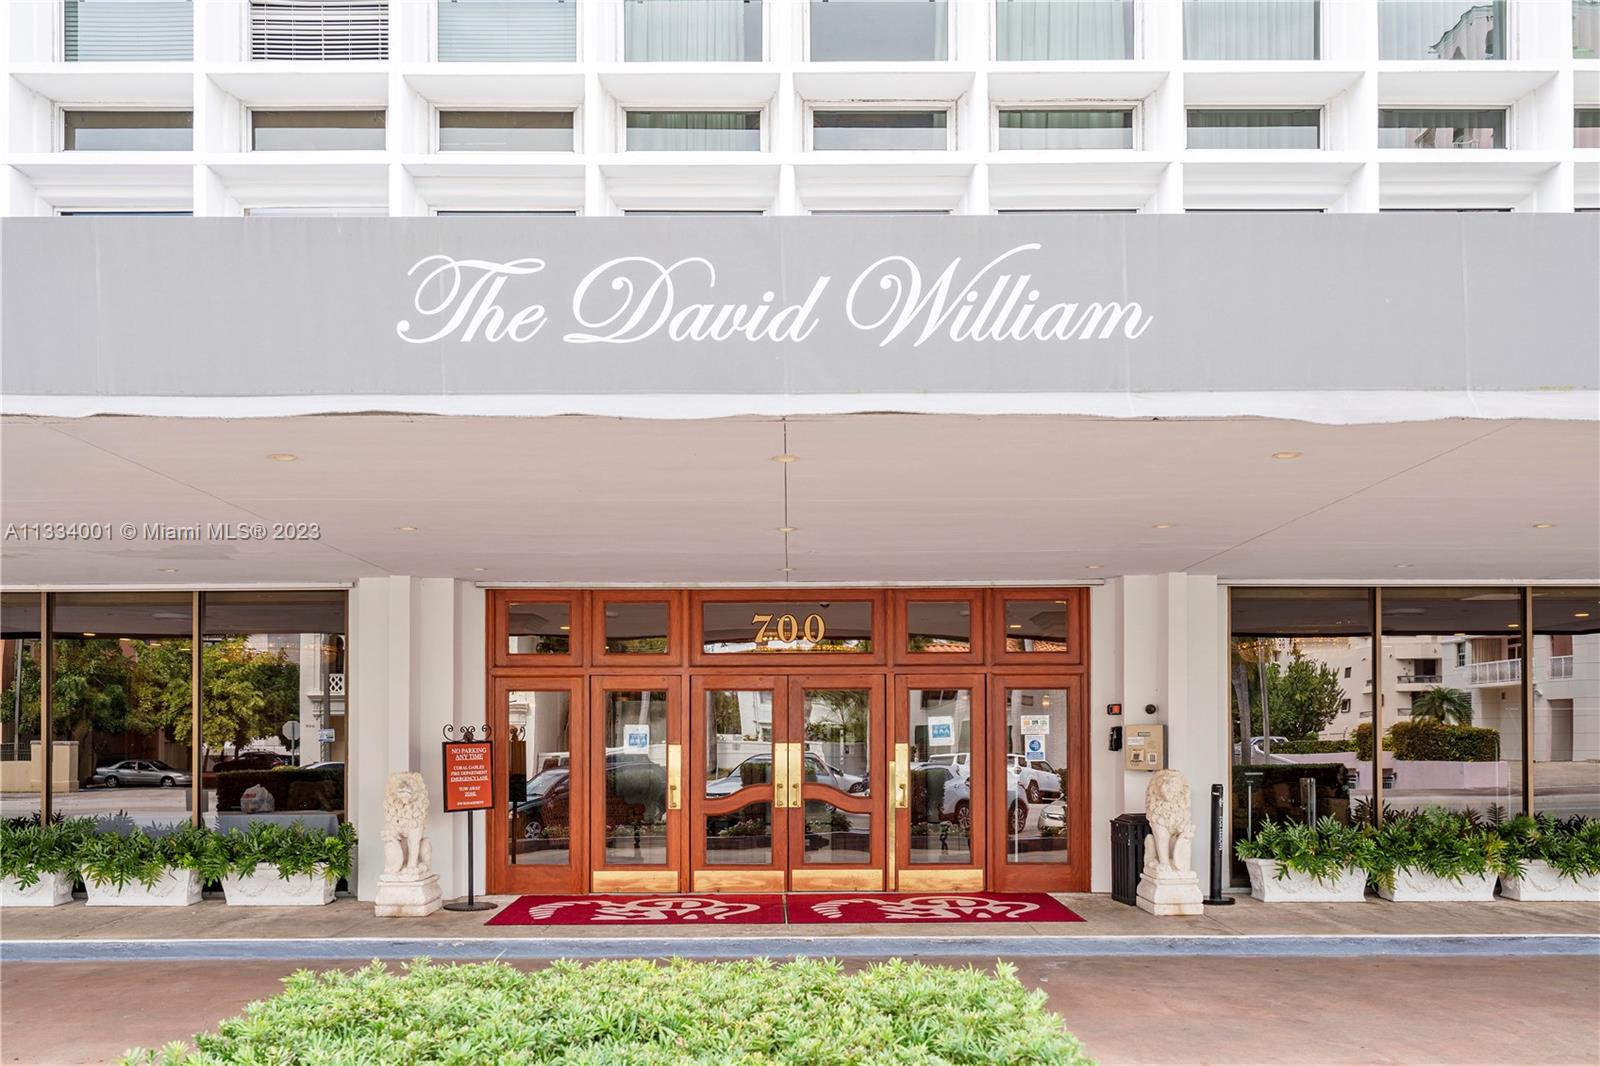 A must-see oversized One Bedroom home at the David William, a premier and highly desirable boutique building in central Coral Gables. This is as close as you will get to a European pied-a-terre! Full-service building with monthly maintenance fee covering all utilities. Prime location along Biltmore Way with easy access to MIA Airport, walking distance to Miracle Mile, restaurants, Publix, shops, trolley route, Freebee, and cultural venues. Great opportunity for investor or owner-occupant. Building exterior has been renovated, waterproofed, and painted. 40-year Certification has been completed. Interior floor area offers 790 SQ FT with corner Balcony facing North. Substantially renovated Kitchen with distinctive cabinets and appliances. Adjustable gallery-type Monorail lighting throughout.